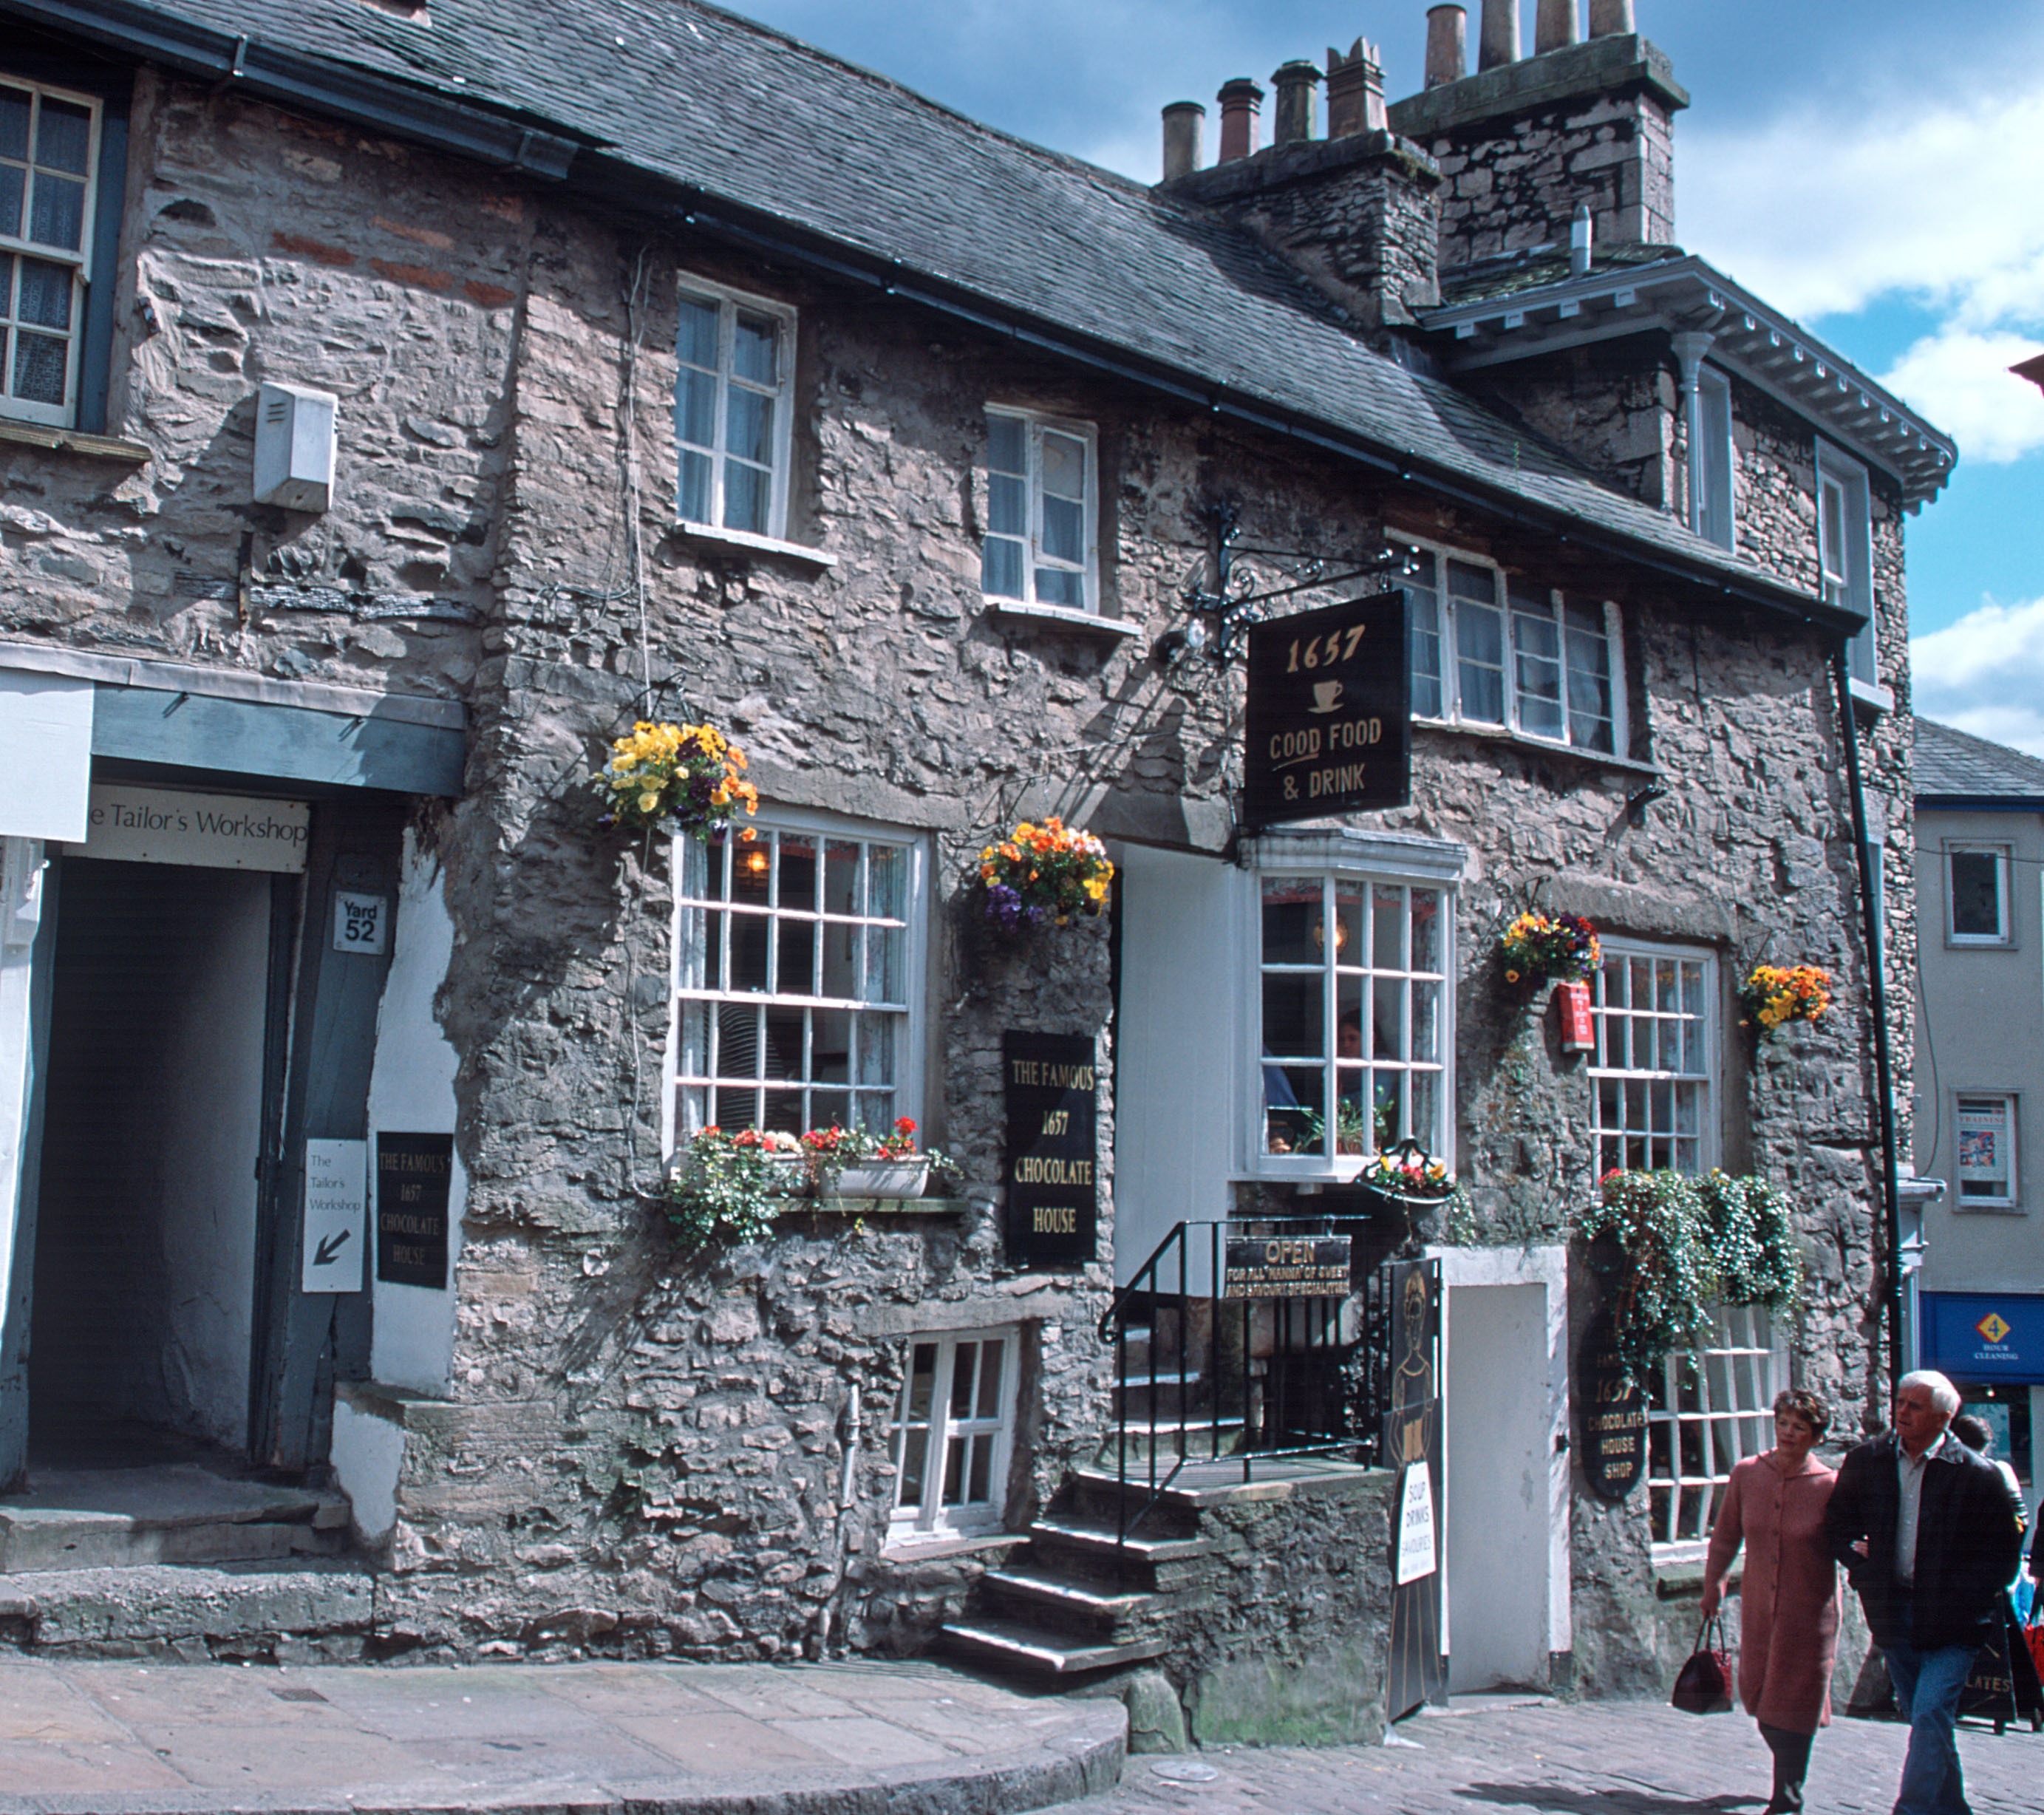 The Chocolate House in Kendal. The cafe is in one of Kendal's oldest buildings dating back to 1657.